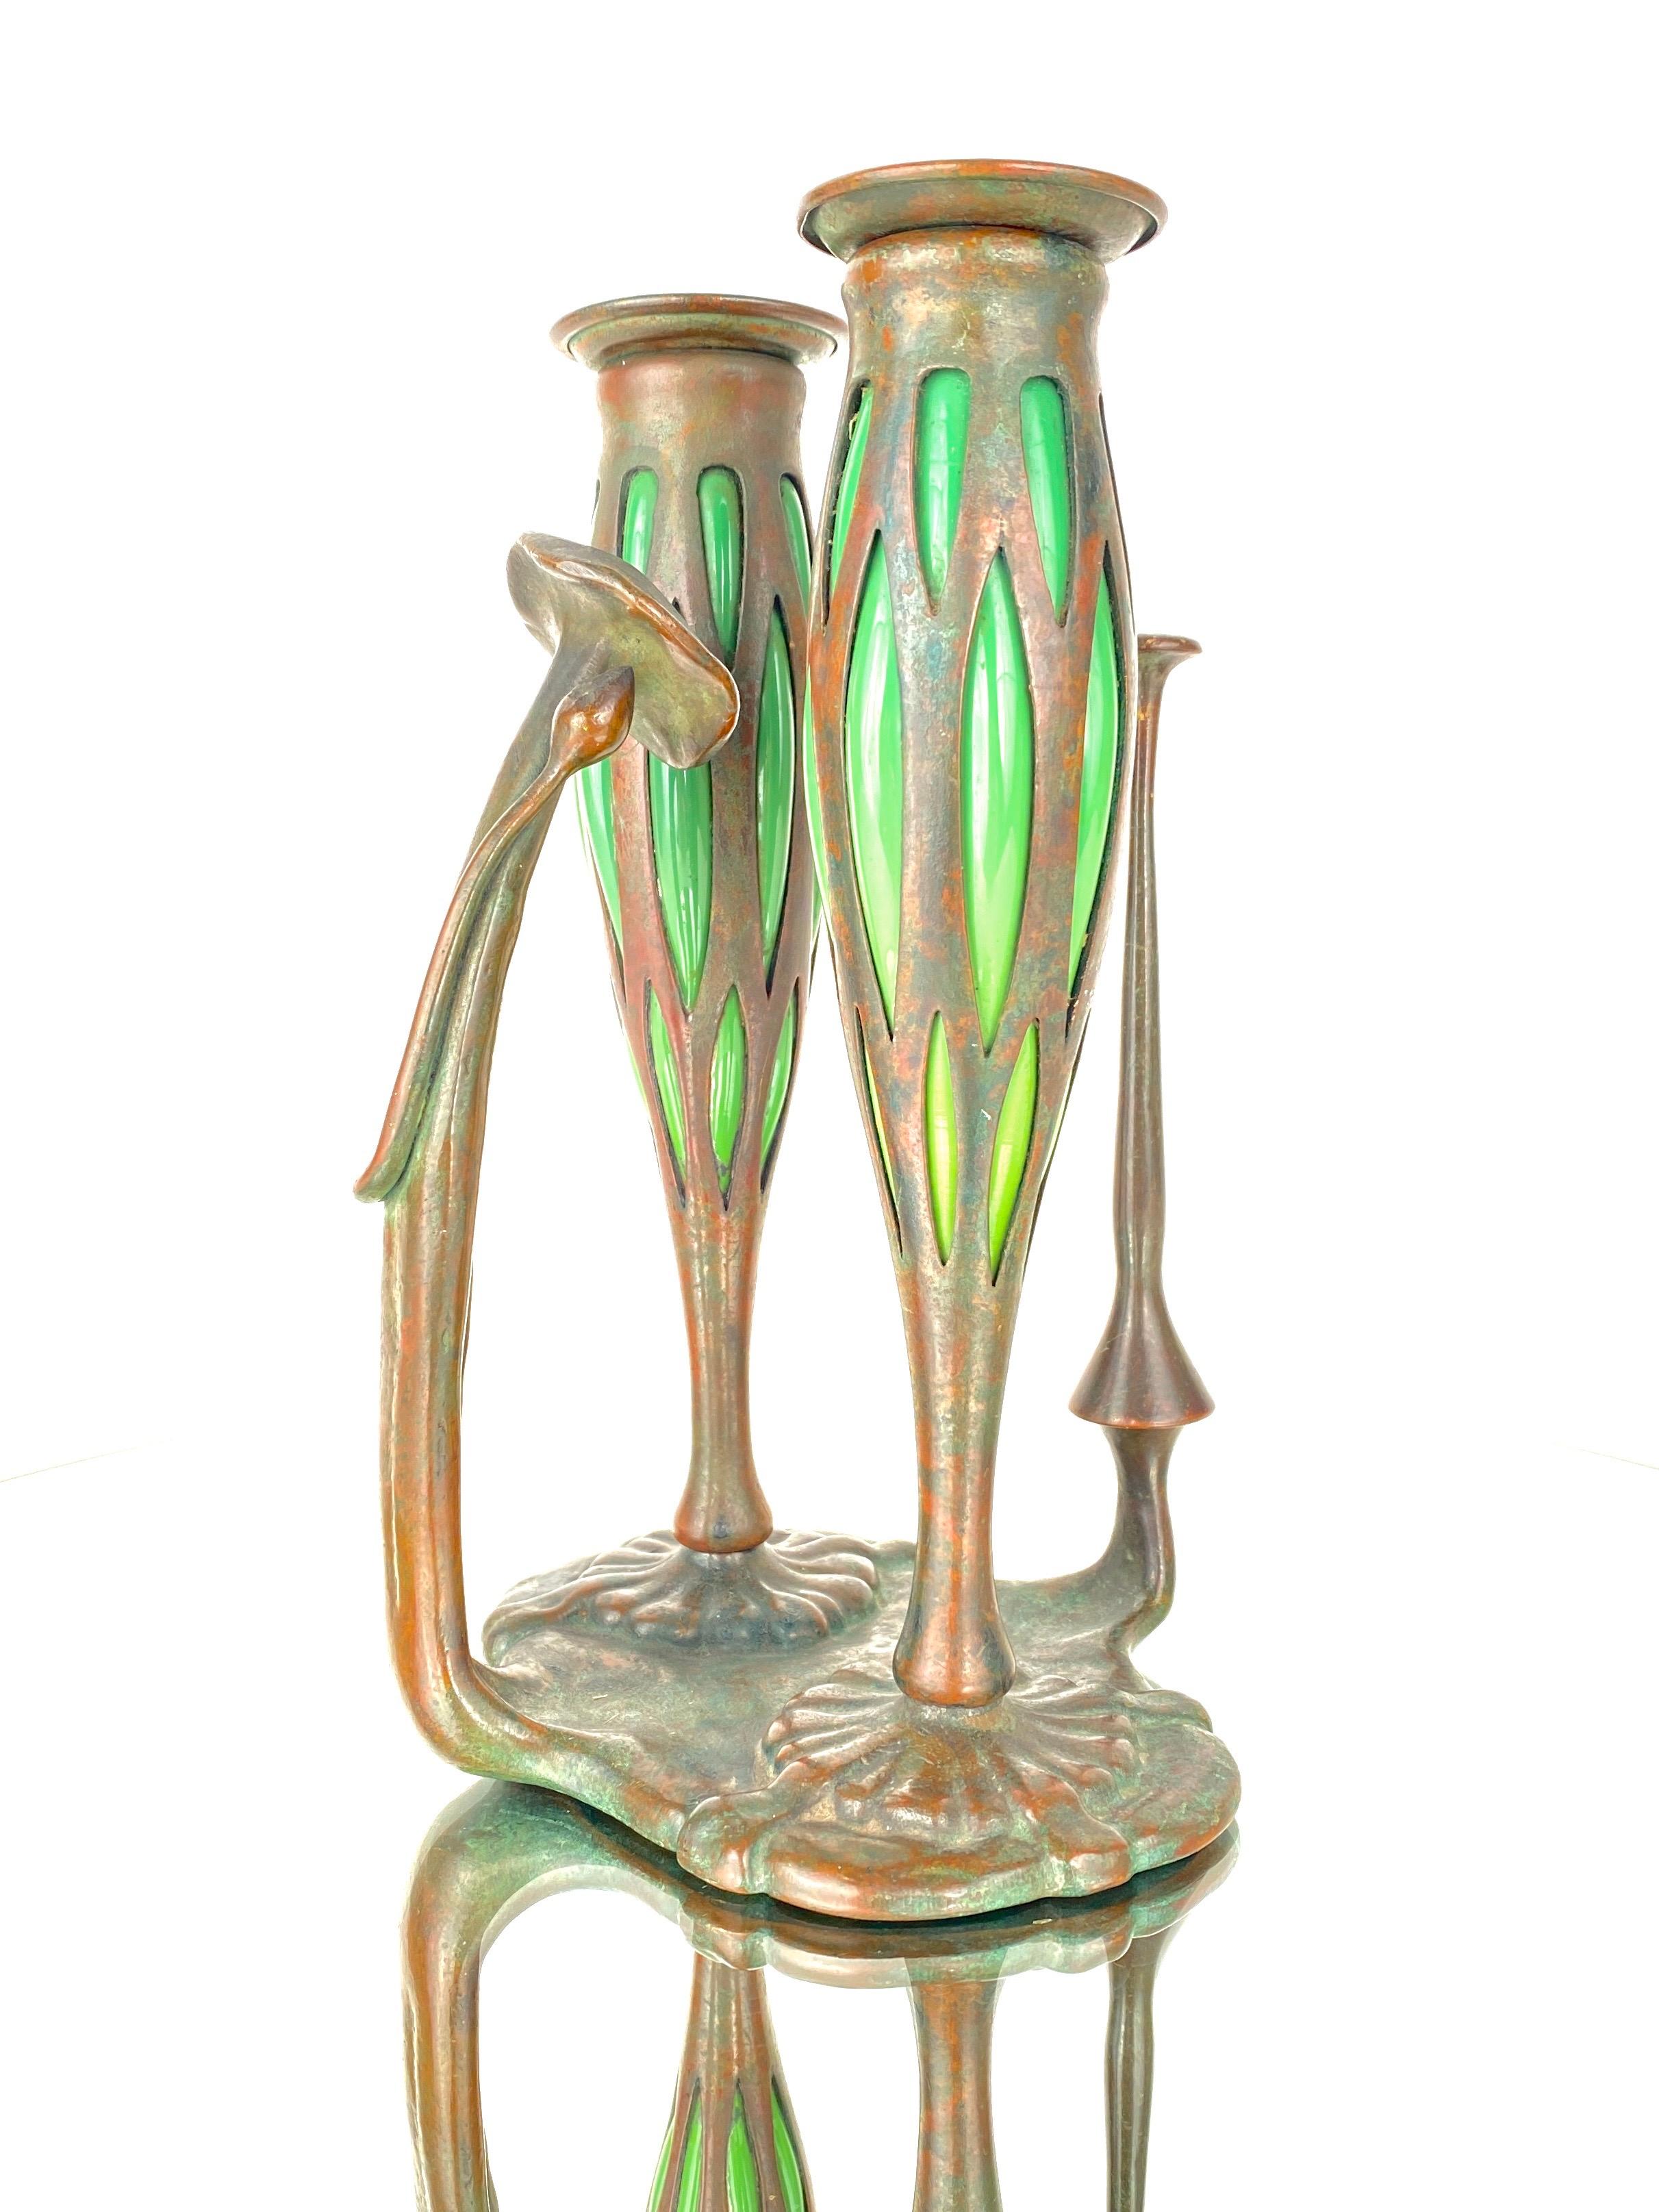 20th Century American Art Nouveau Double Night Chamber Candlestick by, Tiffany Studios